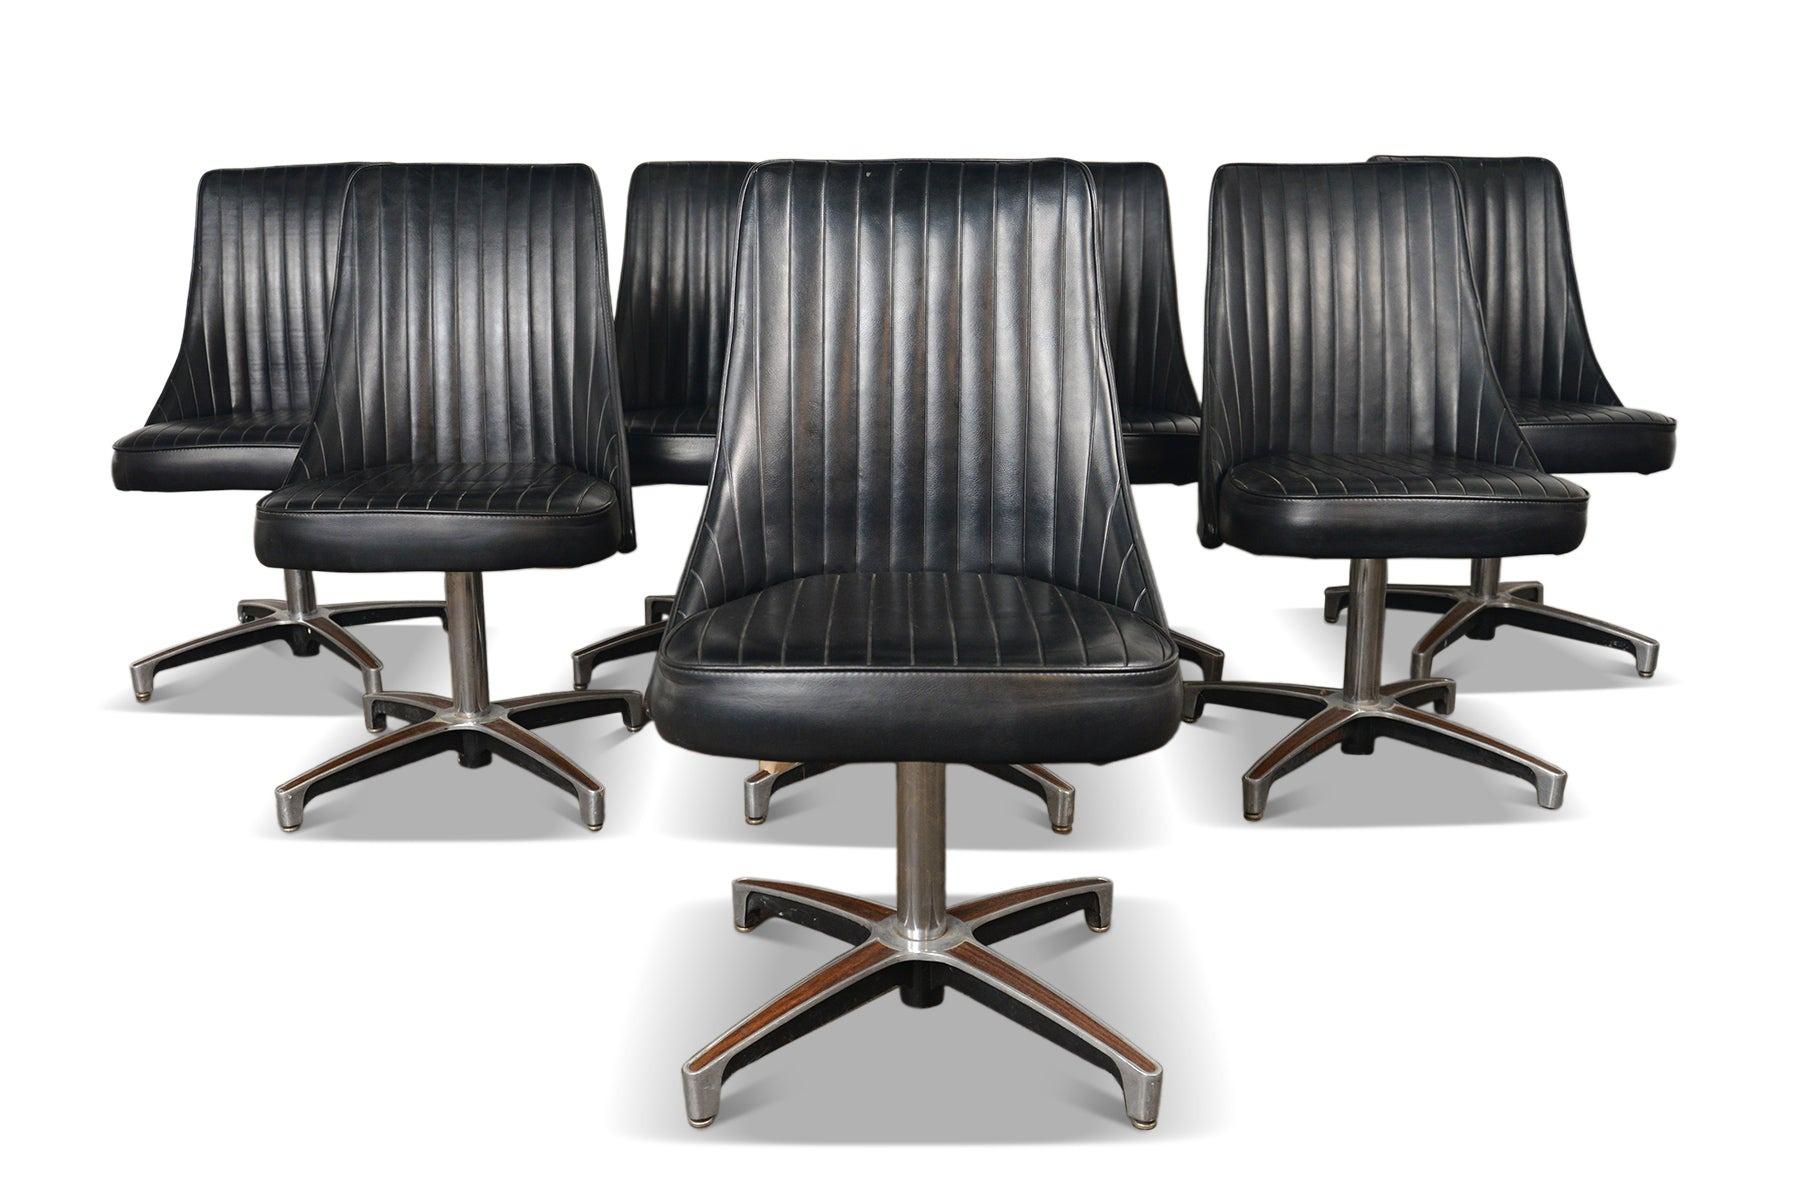 Set of period perfect 1960s Chromcraft lounge chairs.  This set wears its original black vinyl, with seats raised on cast aluminum swivel bases with walnut laminate inlays. 

These were purchased new in 1967 by the Oakland City of Commerce and have